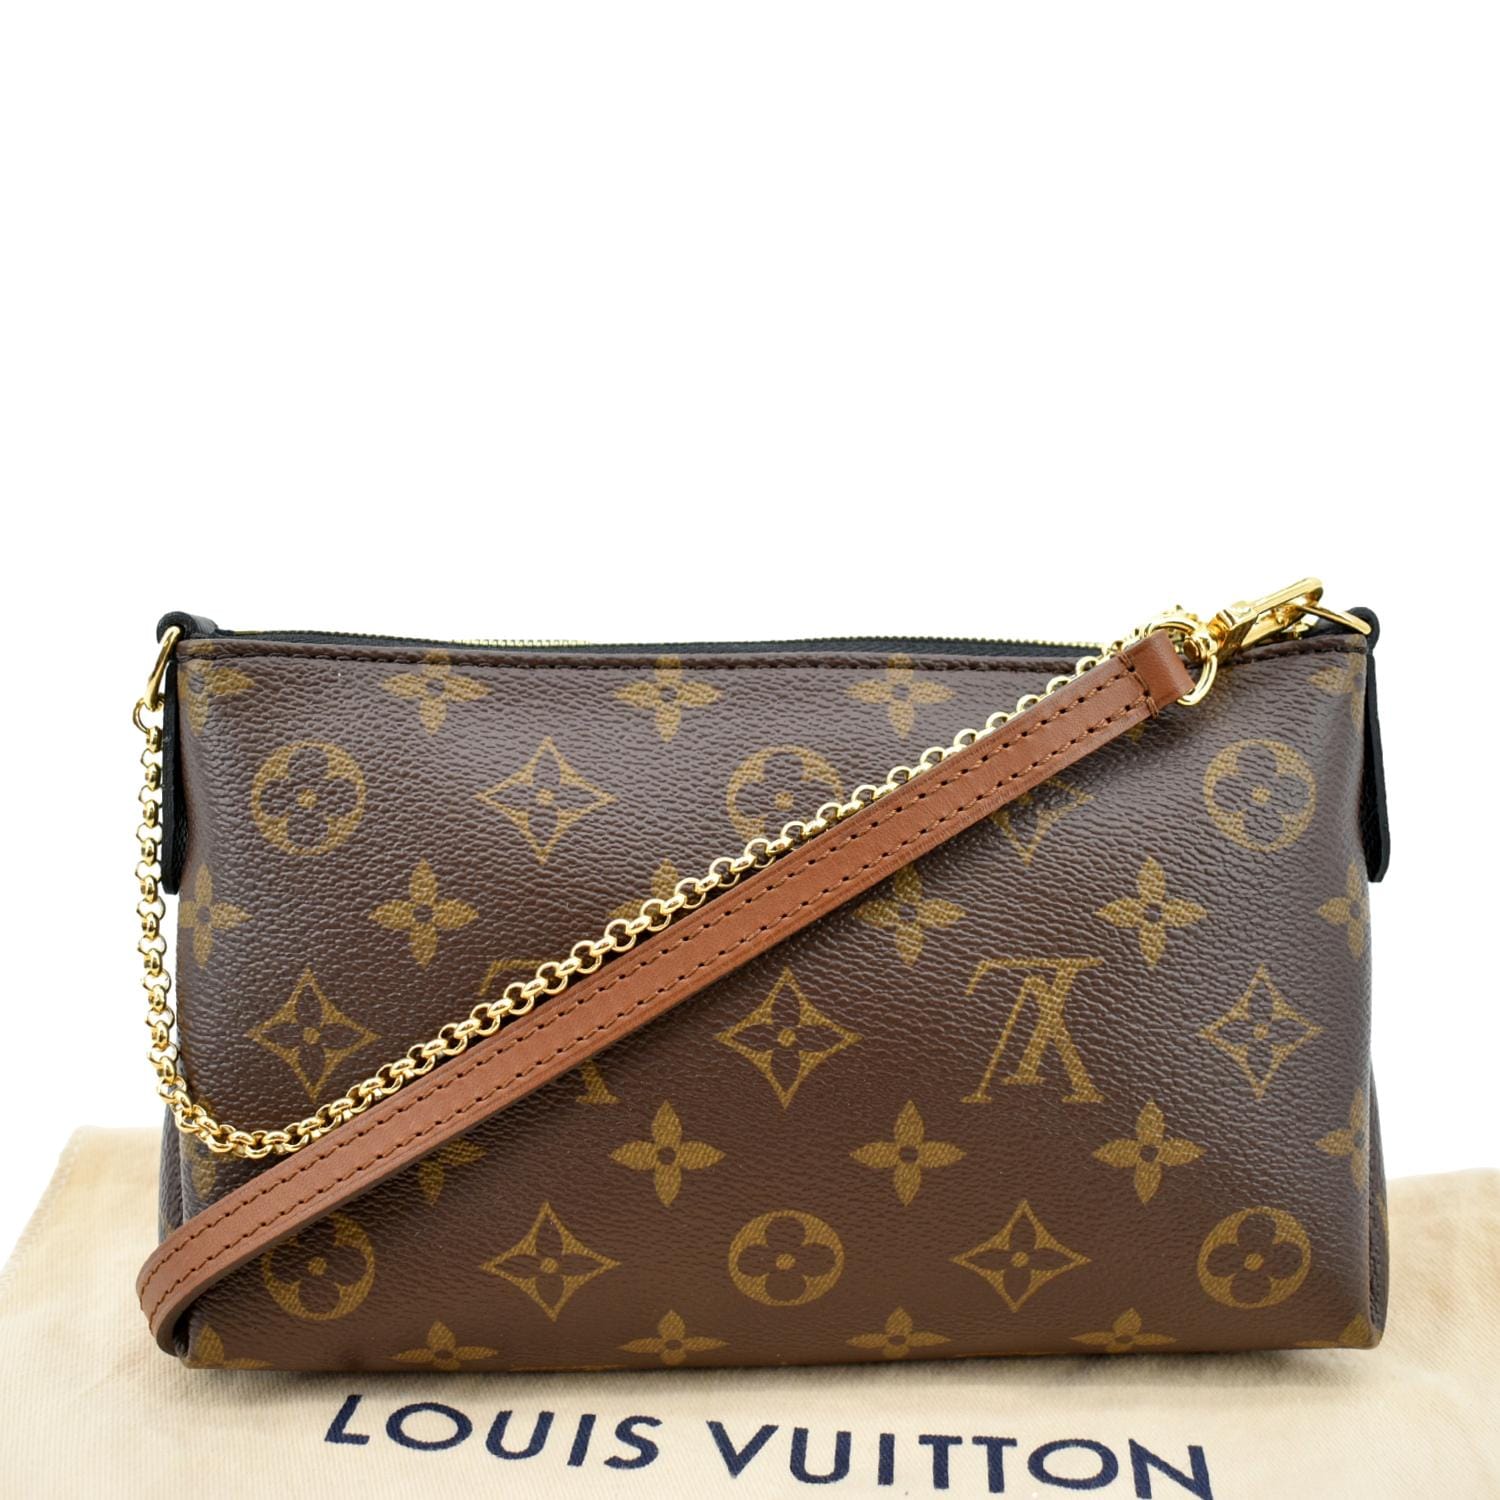 Clutch Pallas - One of my first few LV pieces! Lucky to get it